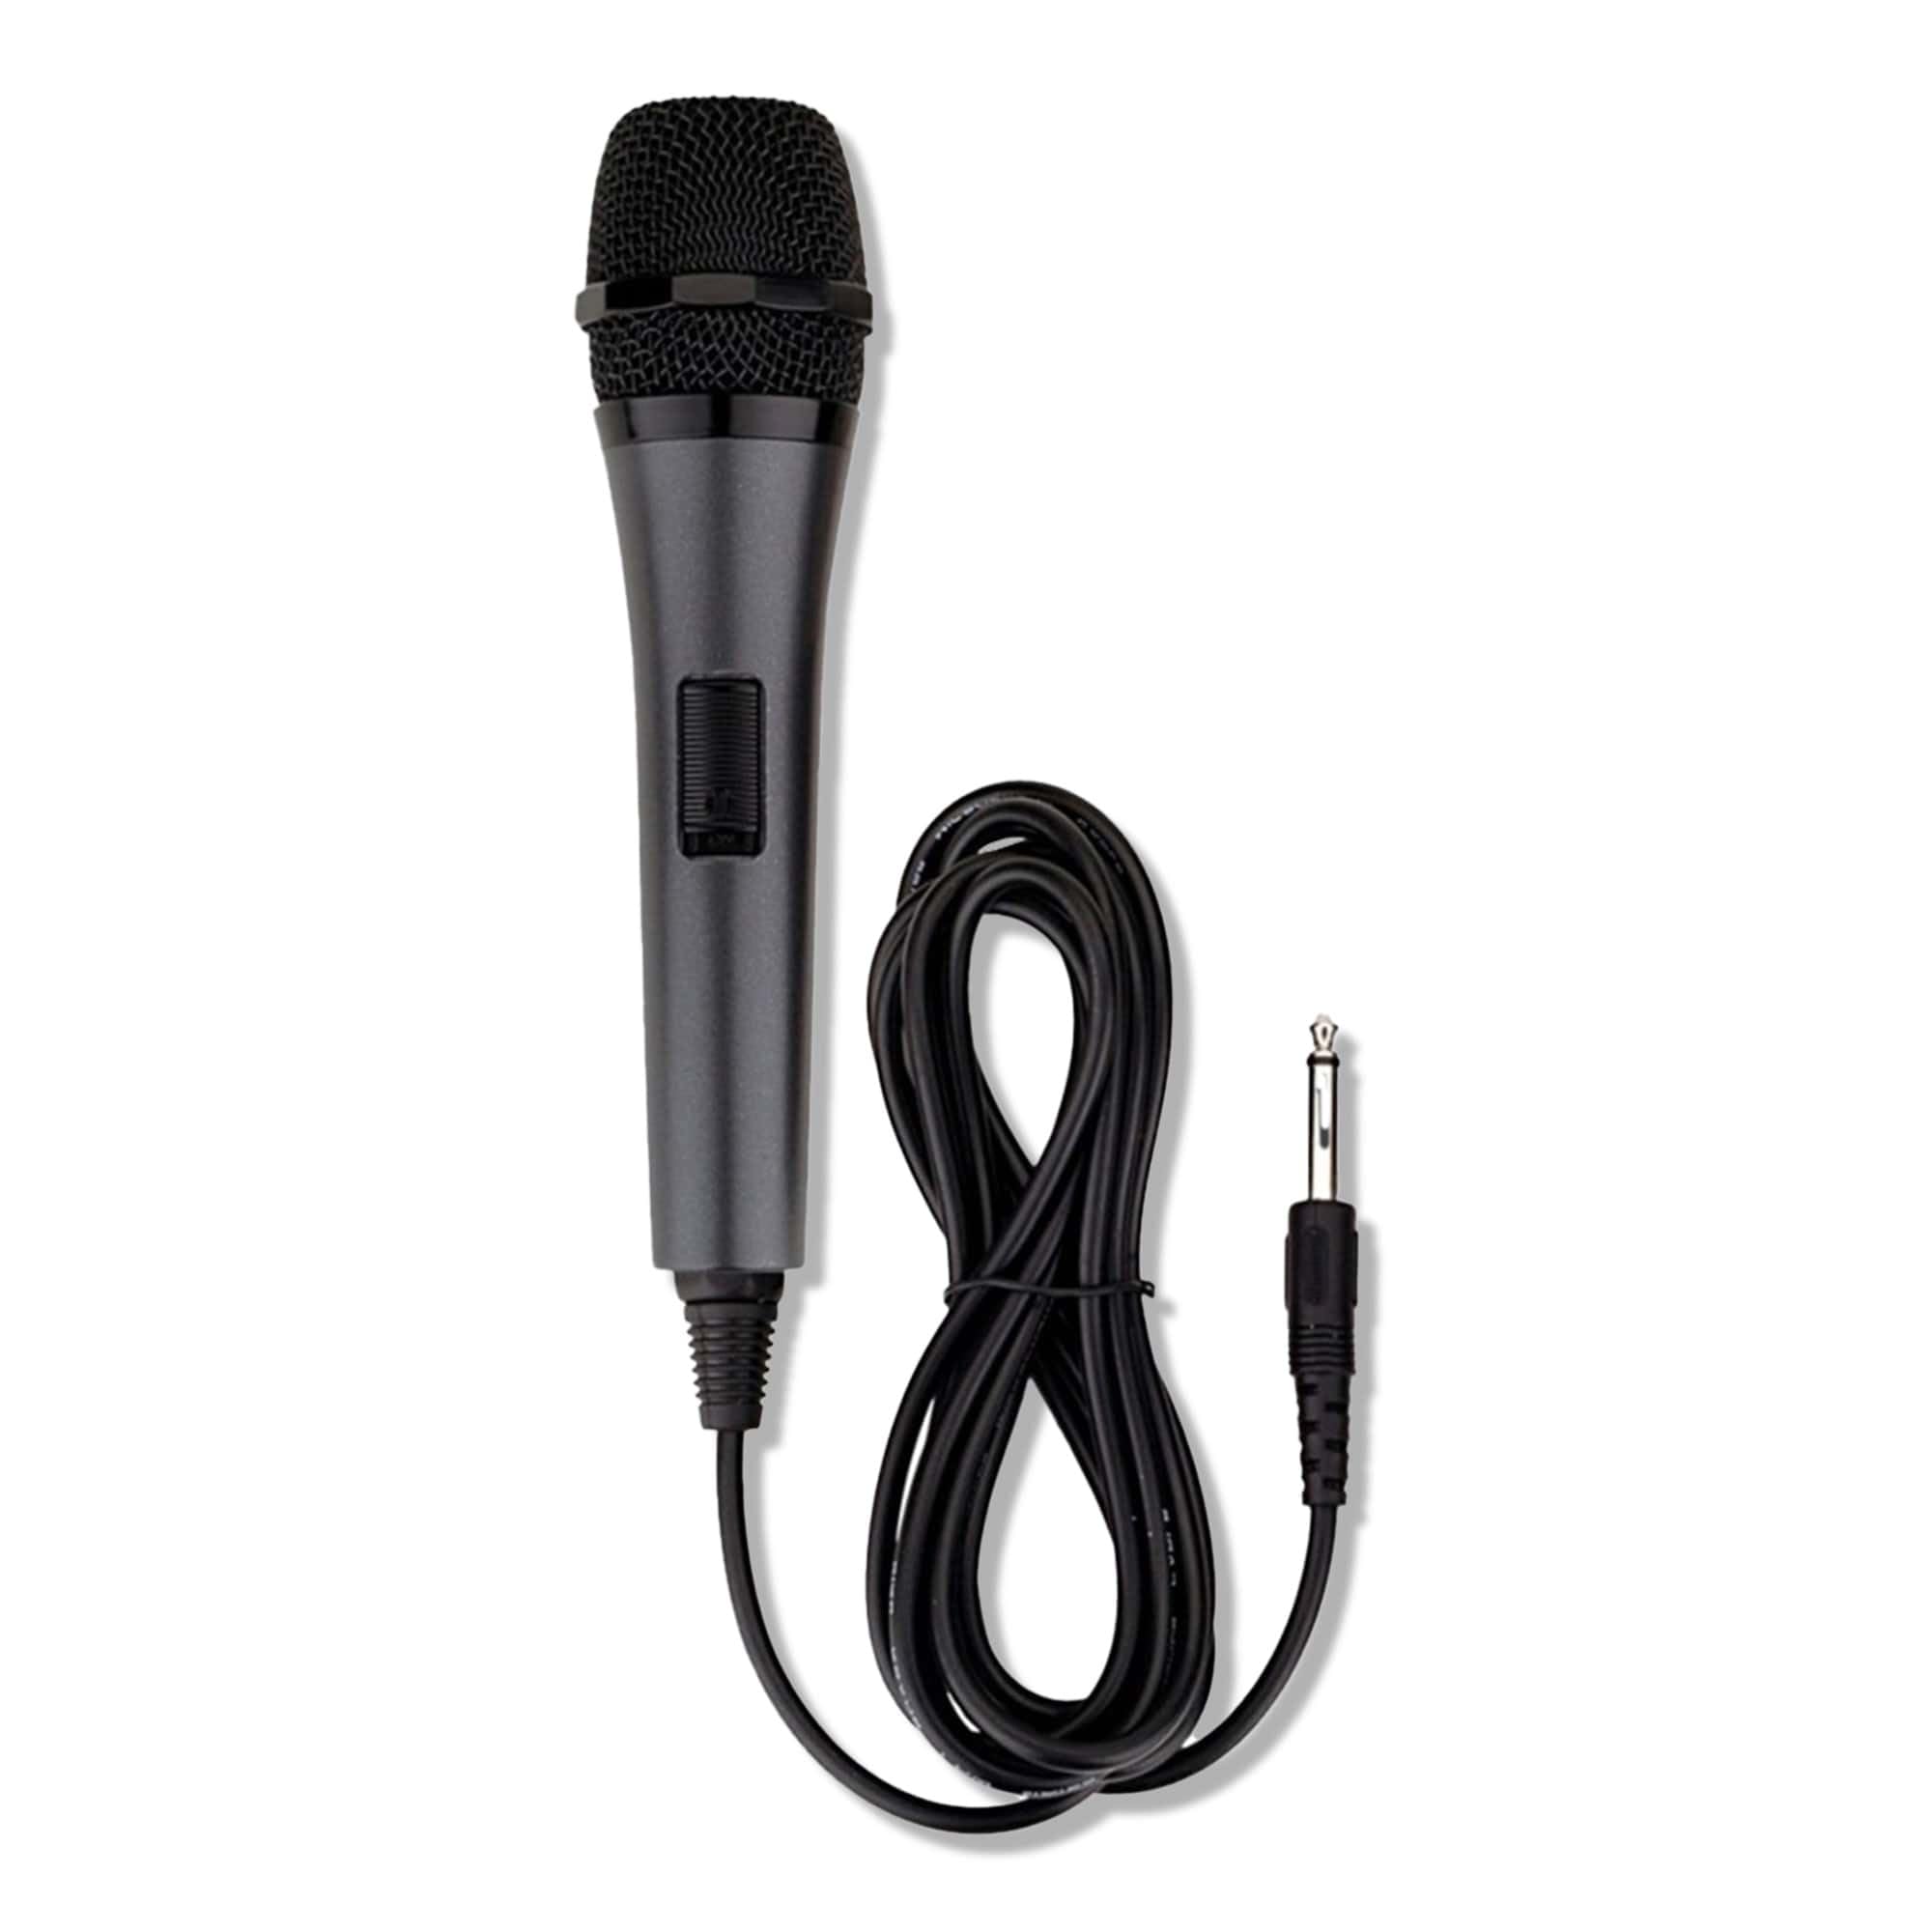 10.5 The Singing Machine Unidirectional Microphone w/ 6.3mm Plug 3.5mm Adapter $3.56 Free Shipping w/ Prime or on $35